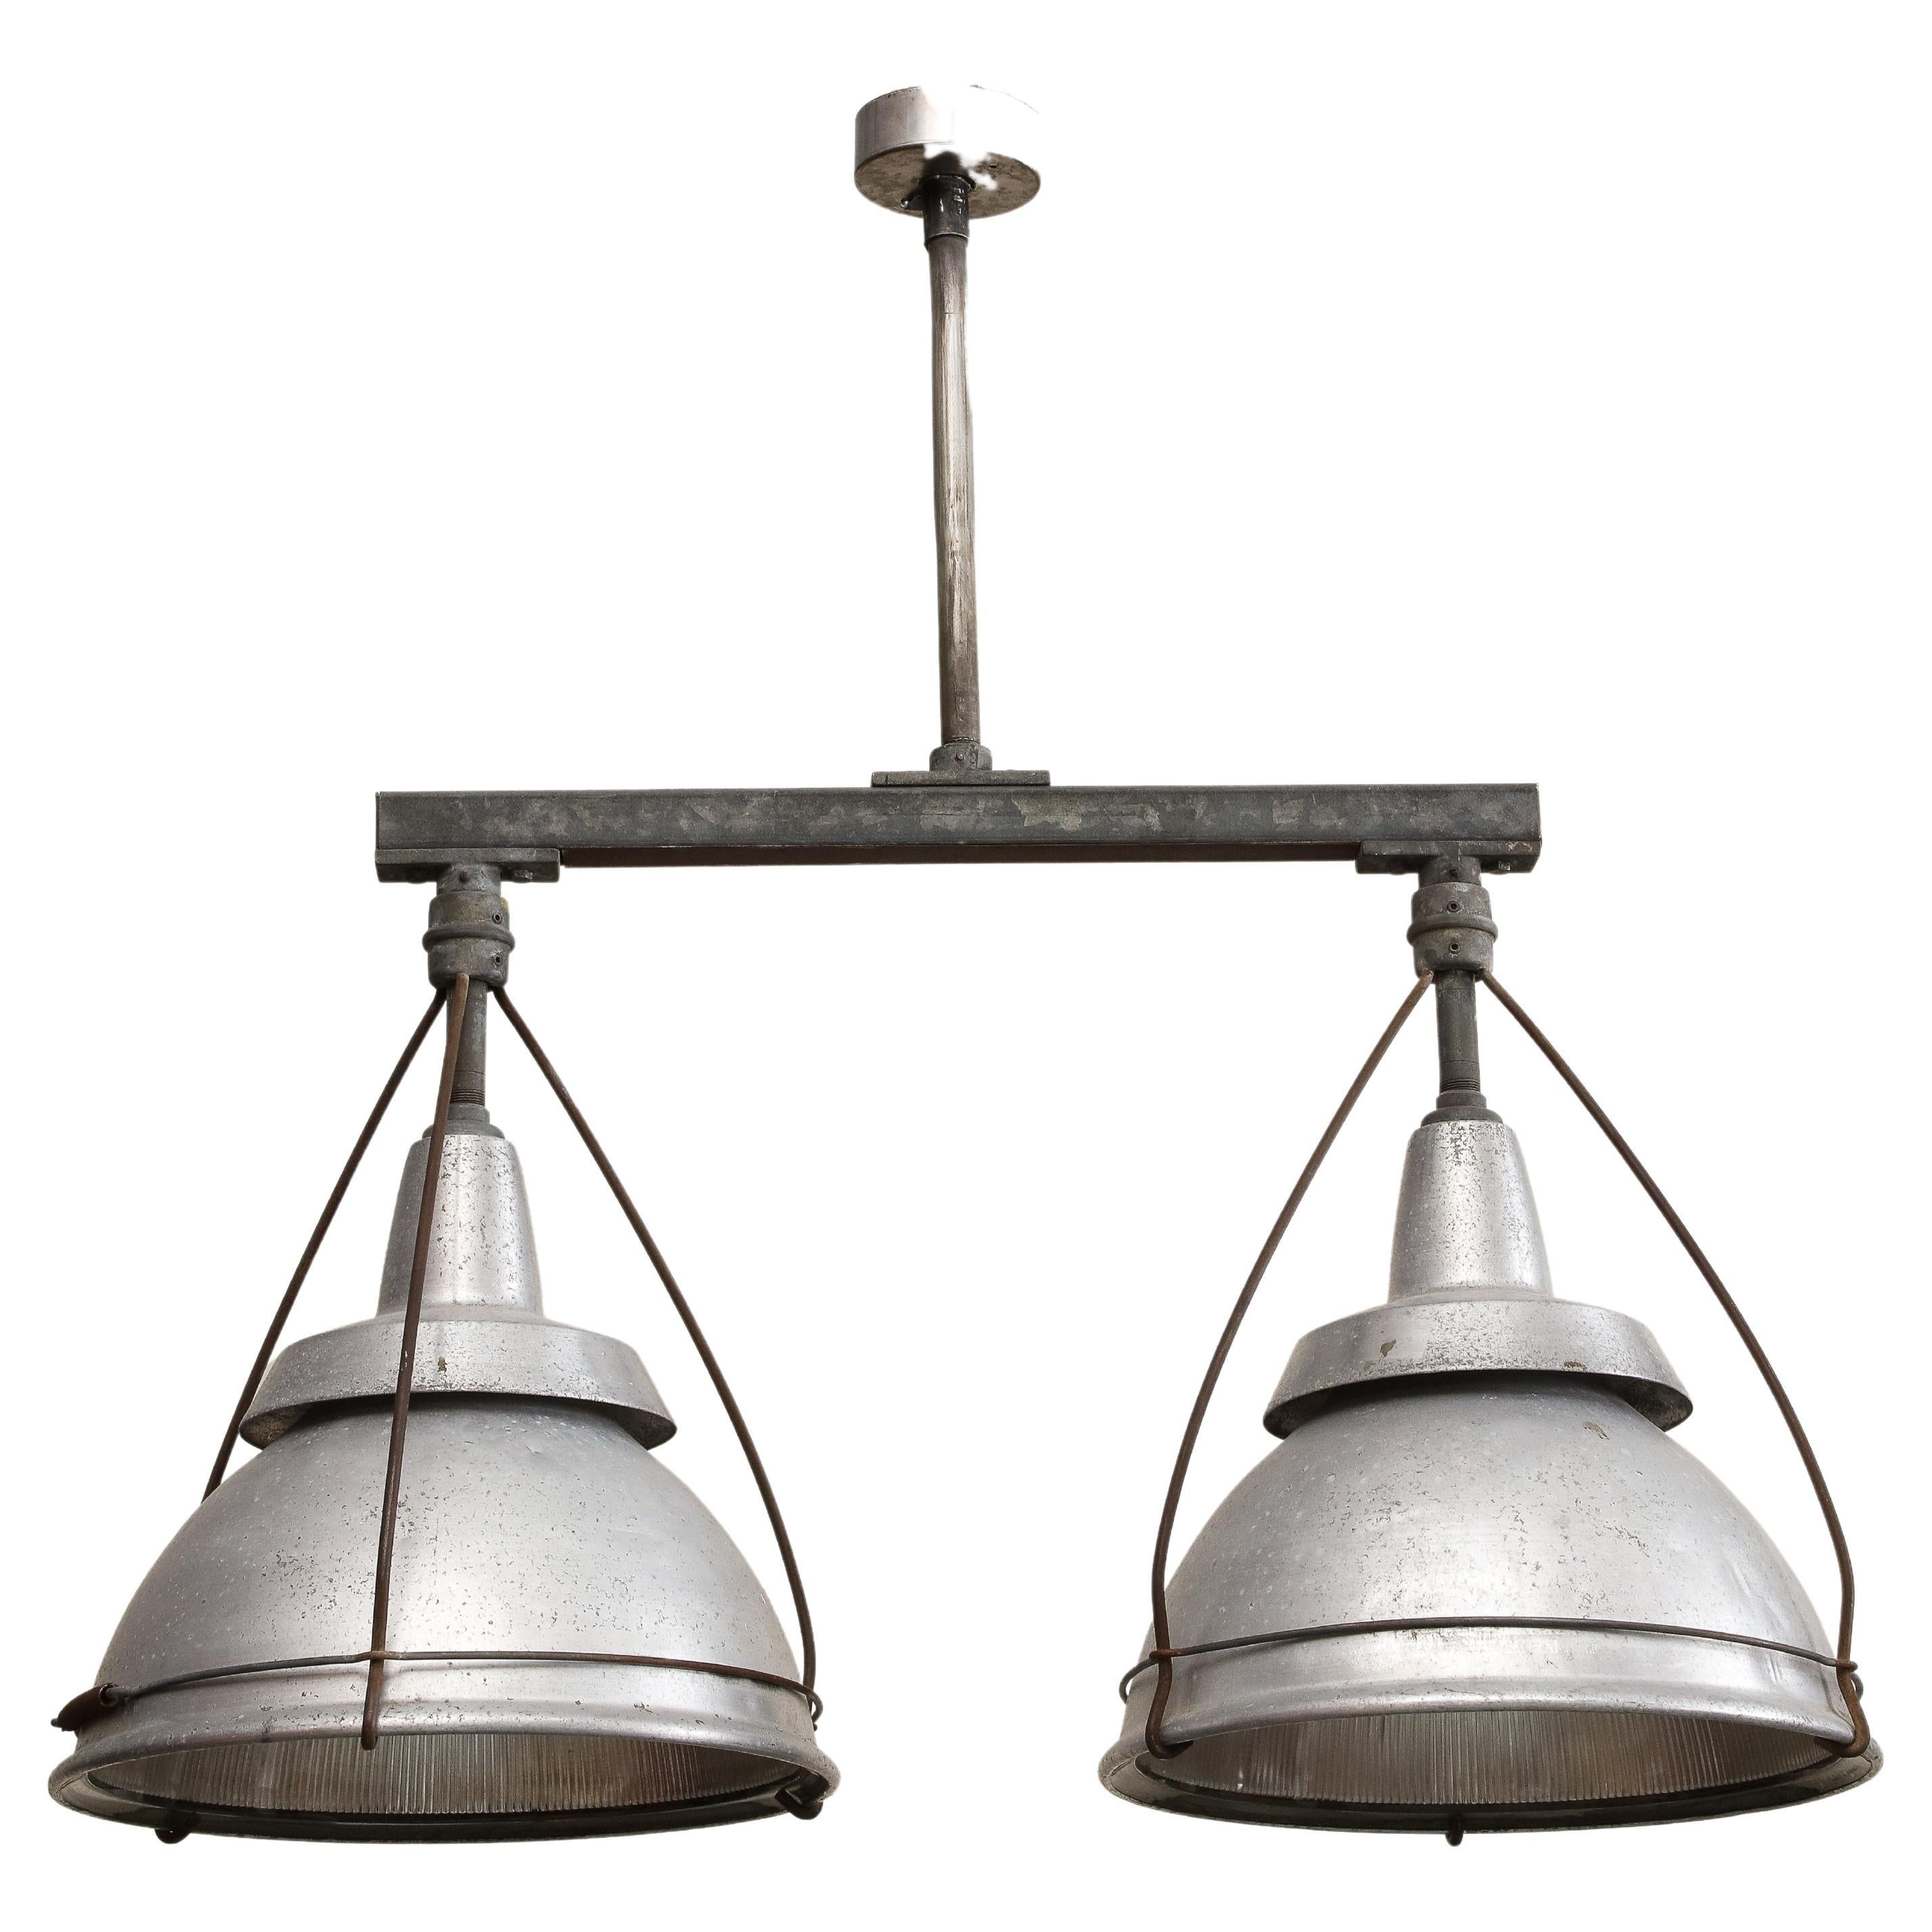 Large Ceiling-Mounted Industrial Double Pendant Light, C. 1920